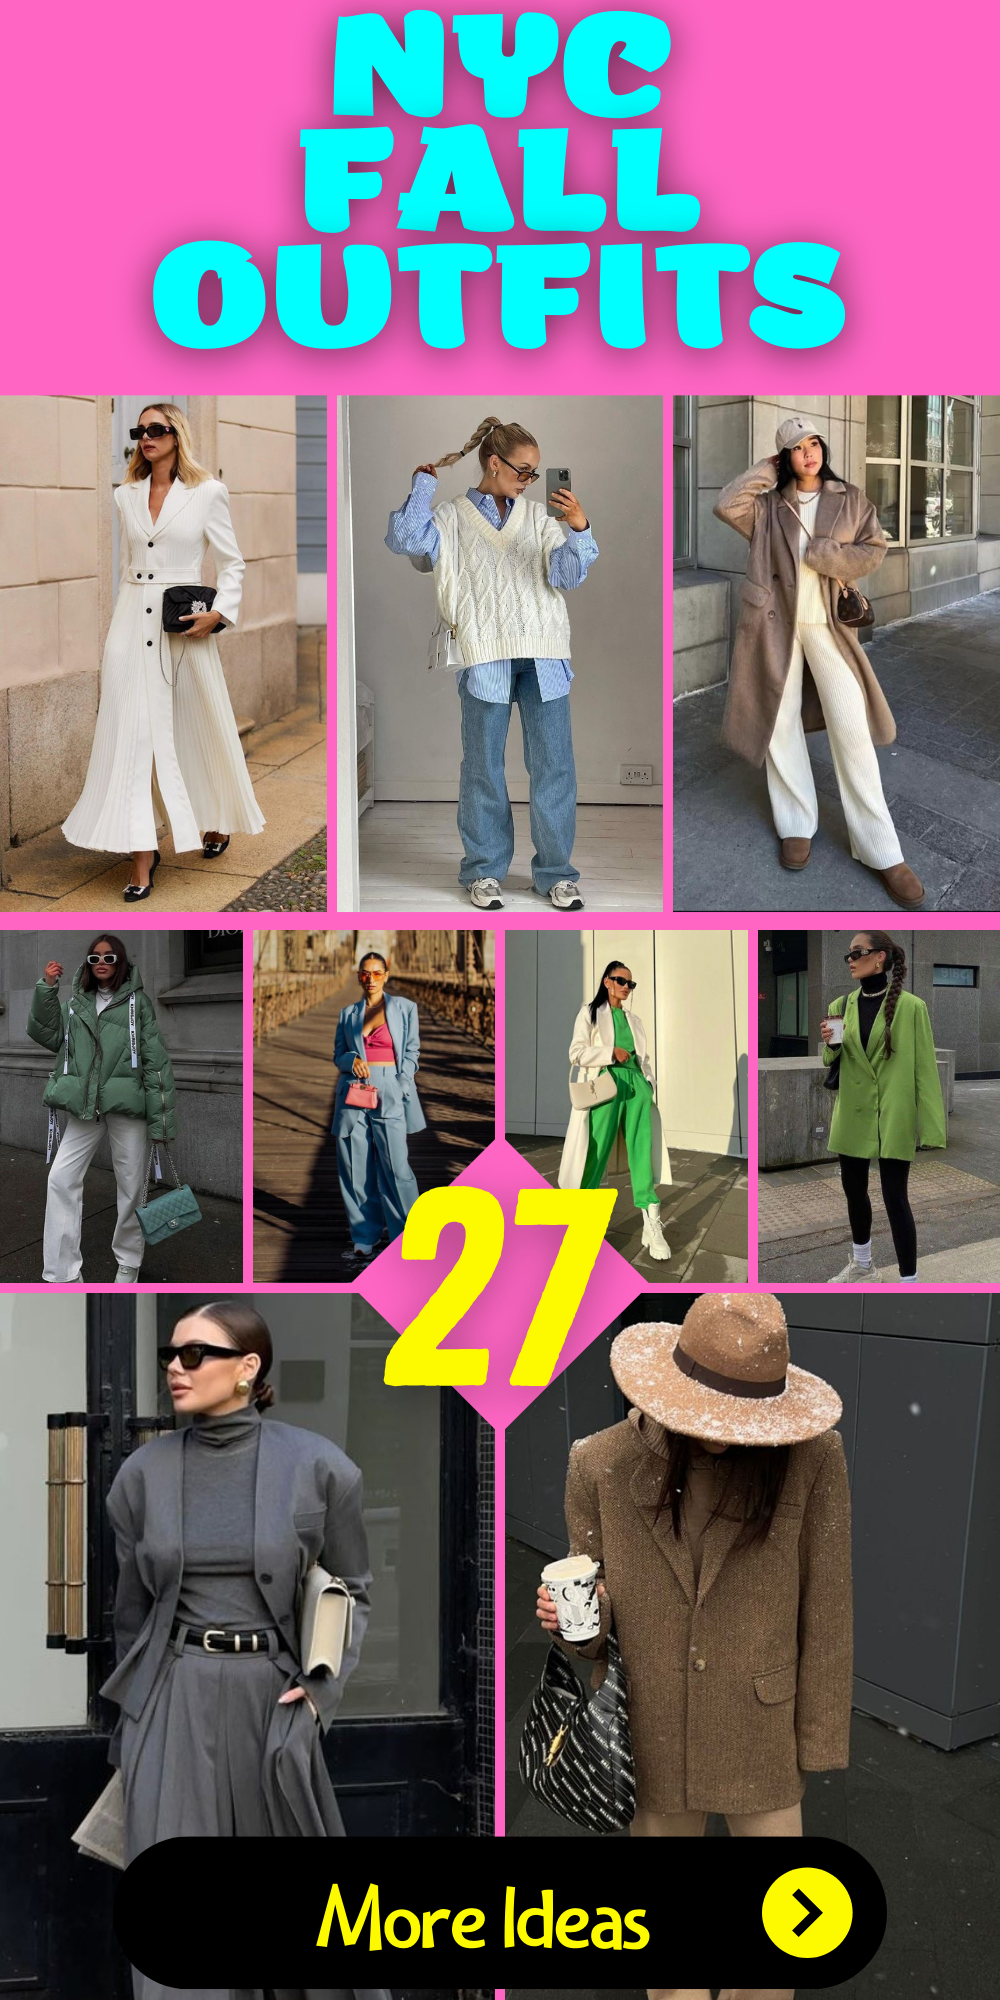 NYC Fall Outfits: 27 Trendy Ideas to Elevate Your Autumn Style